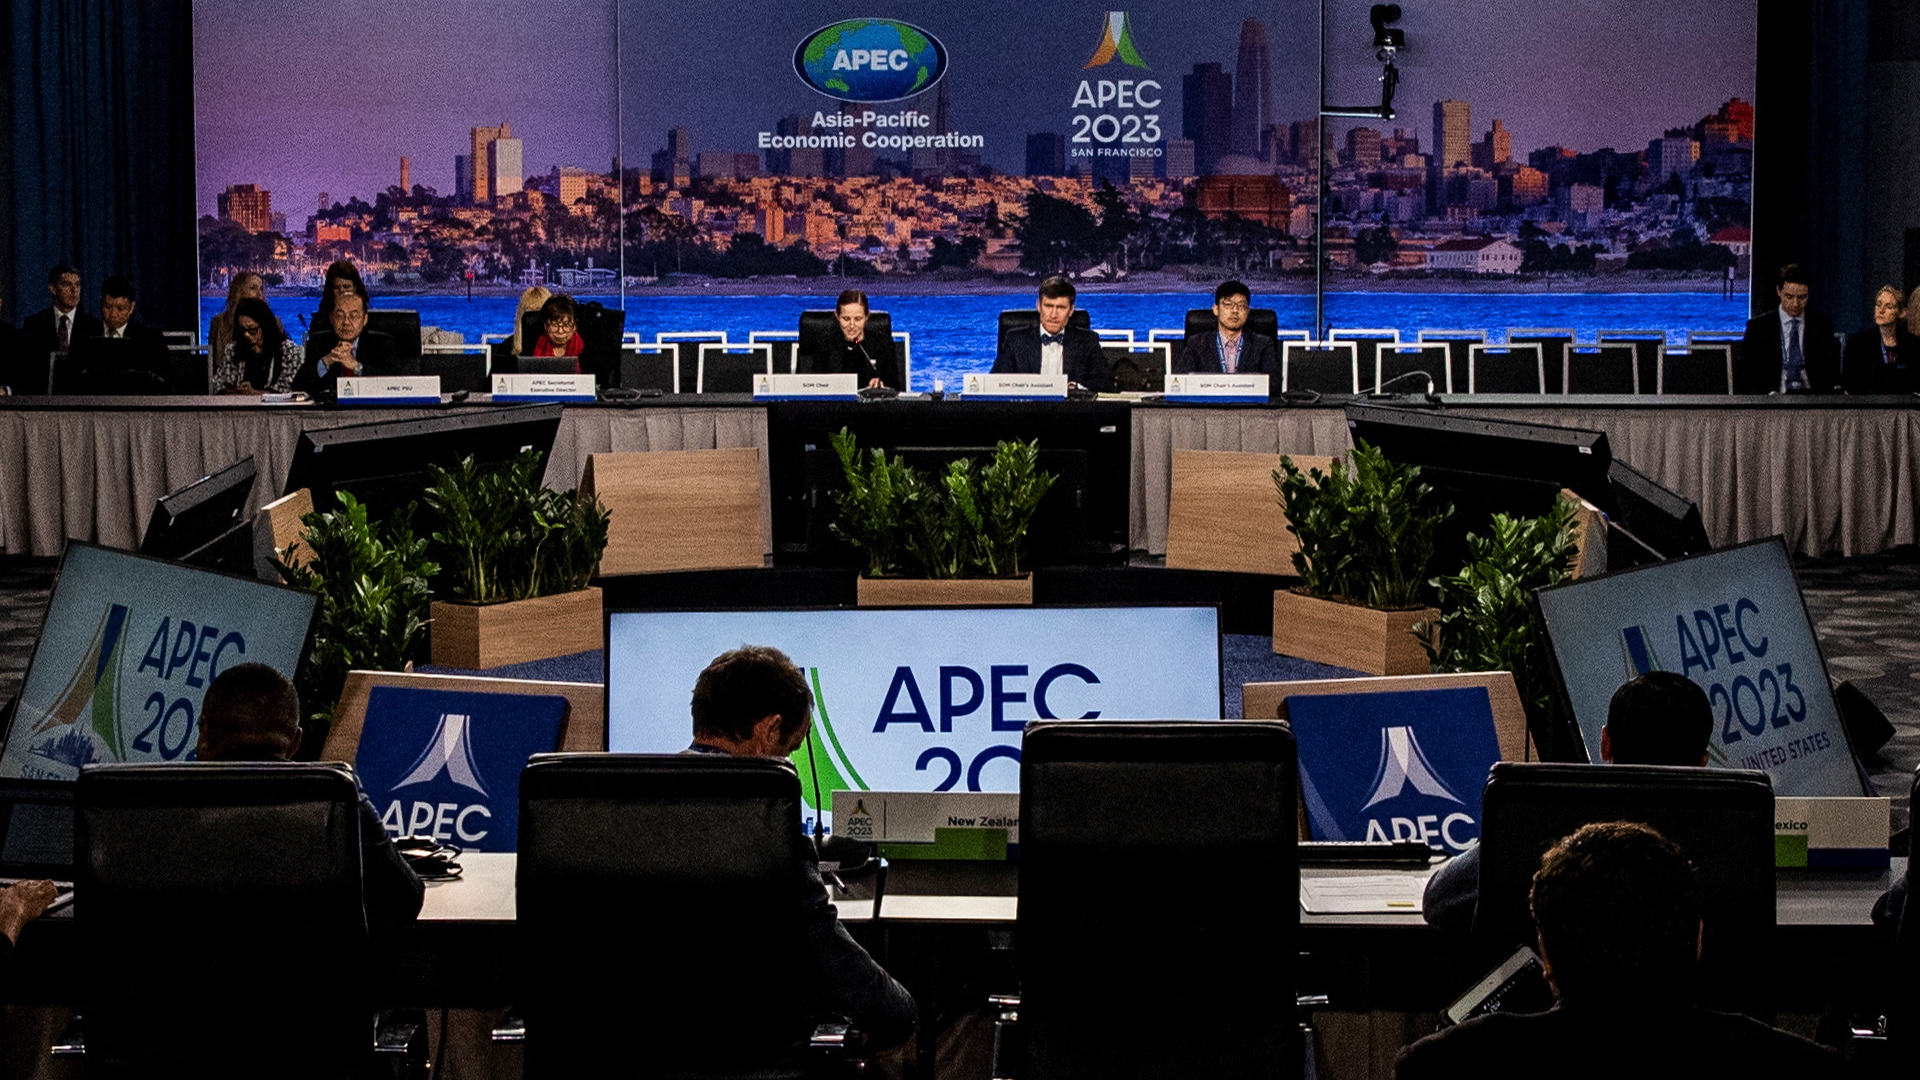 Most notable agreements from APEC